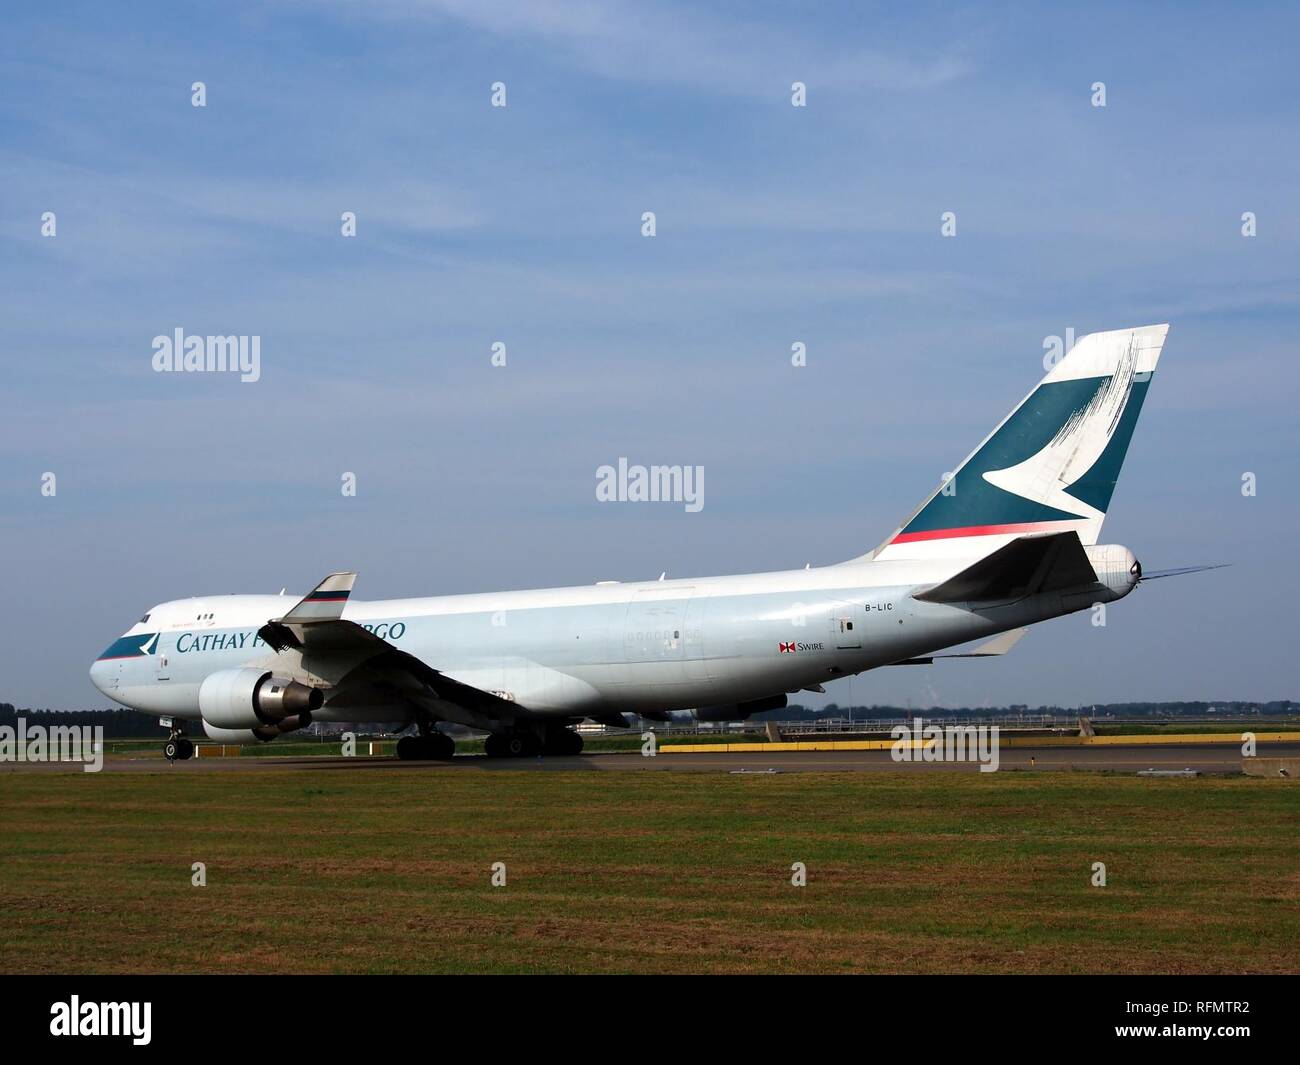 B-LIC Cathay Pacific Boeing 747-467F(ER) - cn 36868, 25august2013 pic-011. Stock Photo